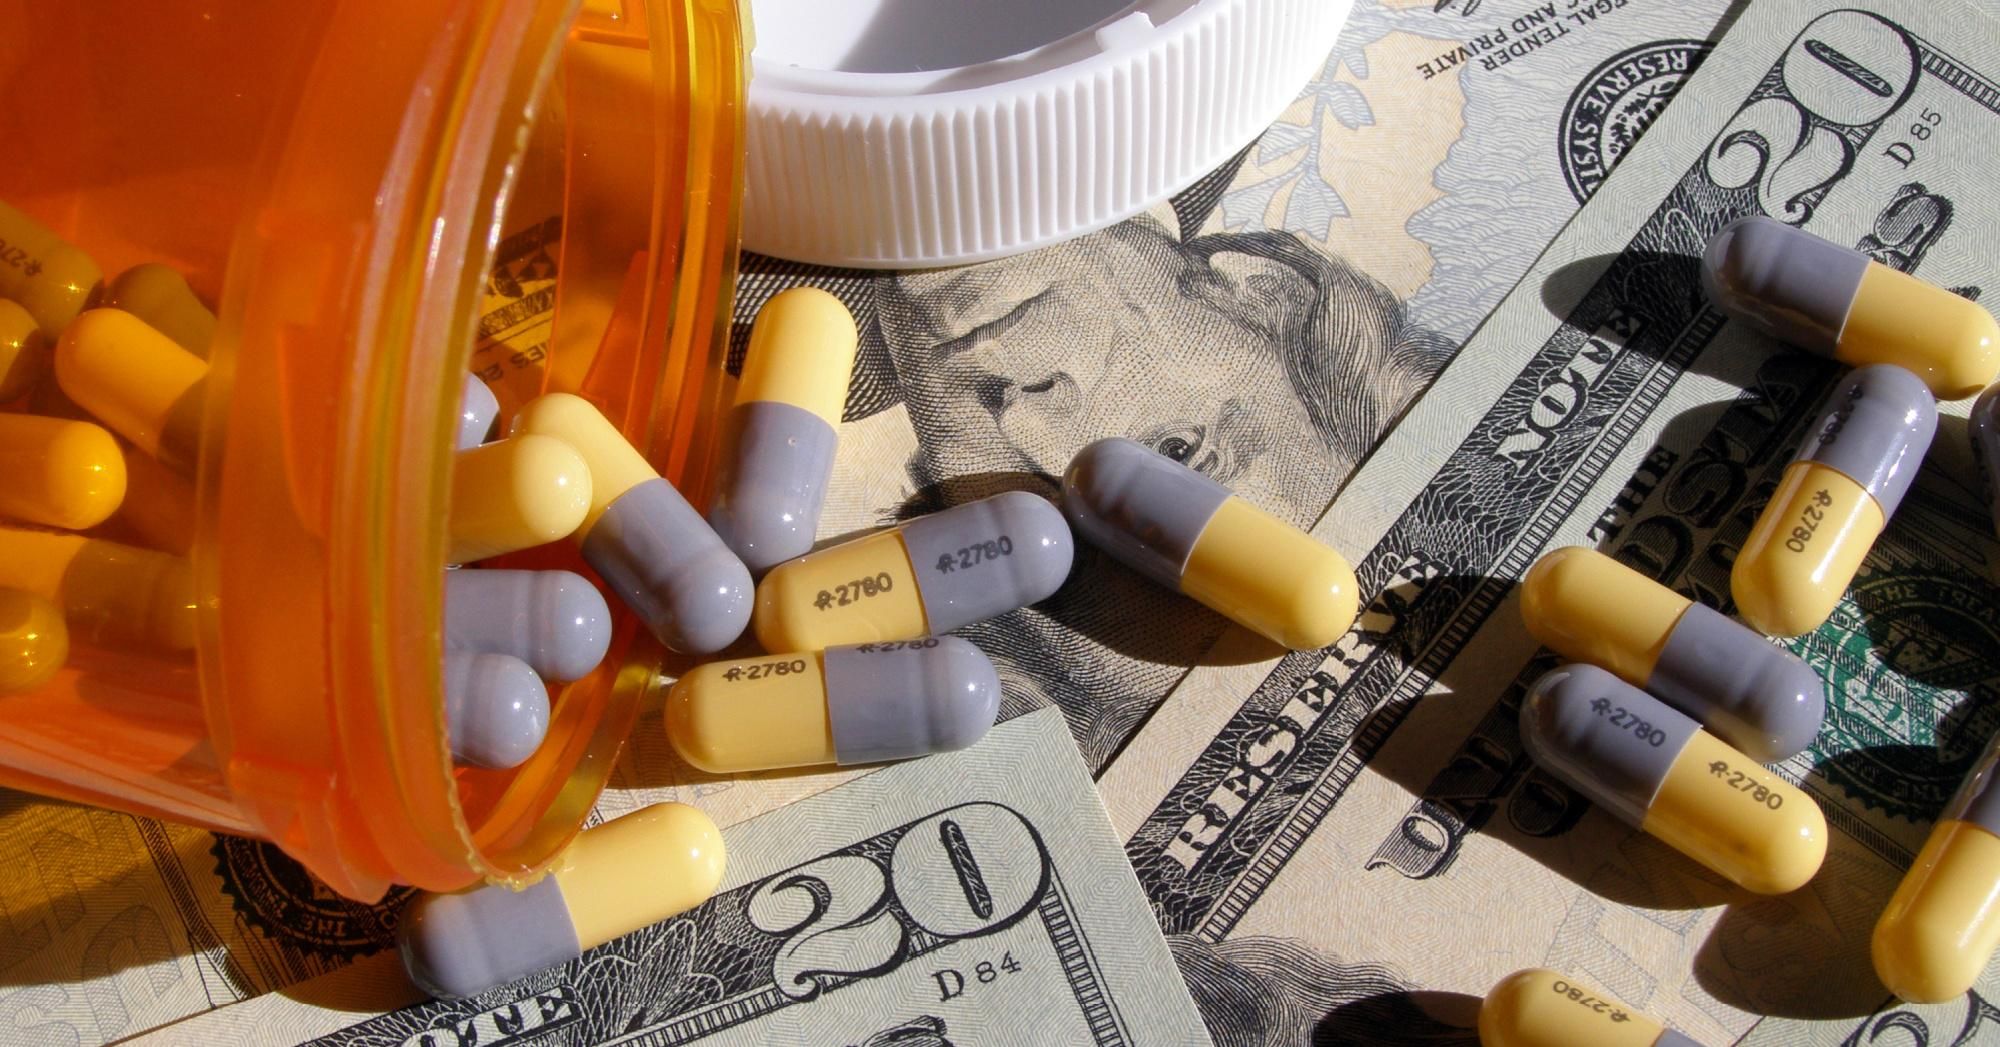 Do Not 'Cave to Big Pharma': 60+ Groups Tell Schumer, Pelosi to Deliver on  Drug Pricing Reform